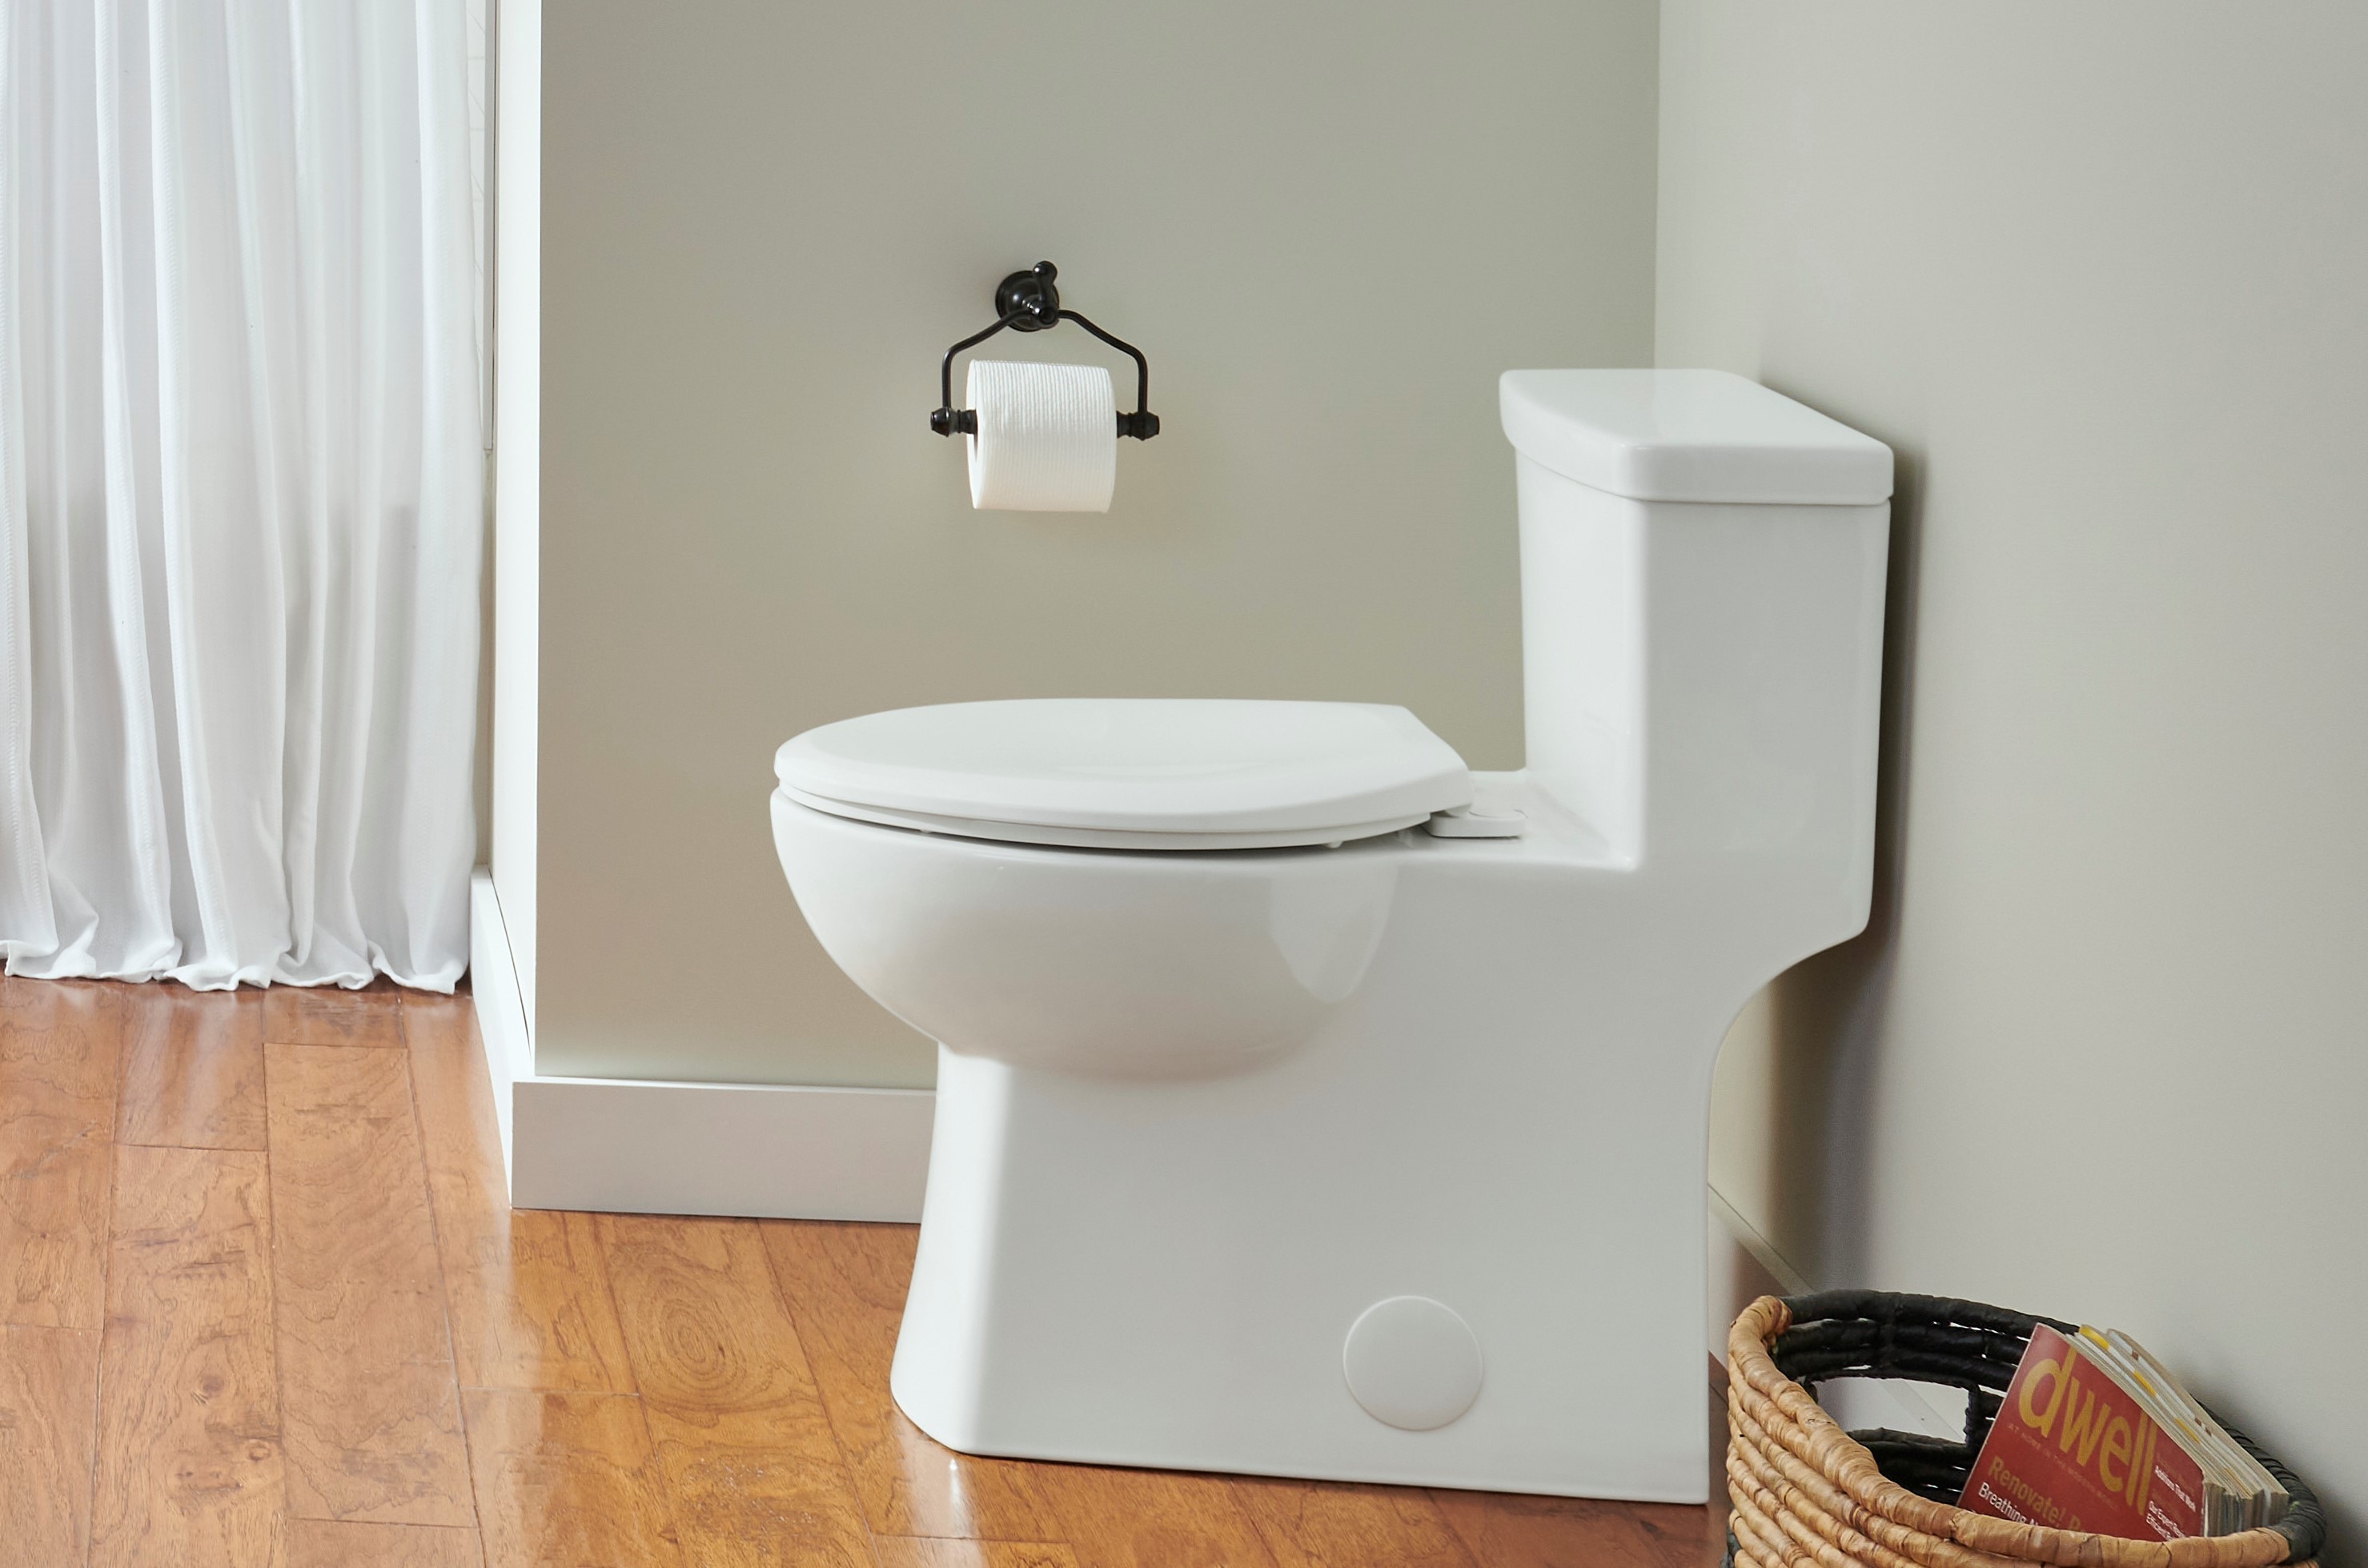 https://www.gerber-us.com/file/v9047402839754901763/products/find-the-loo-thats-right-for-you.jpeg